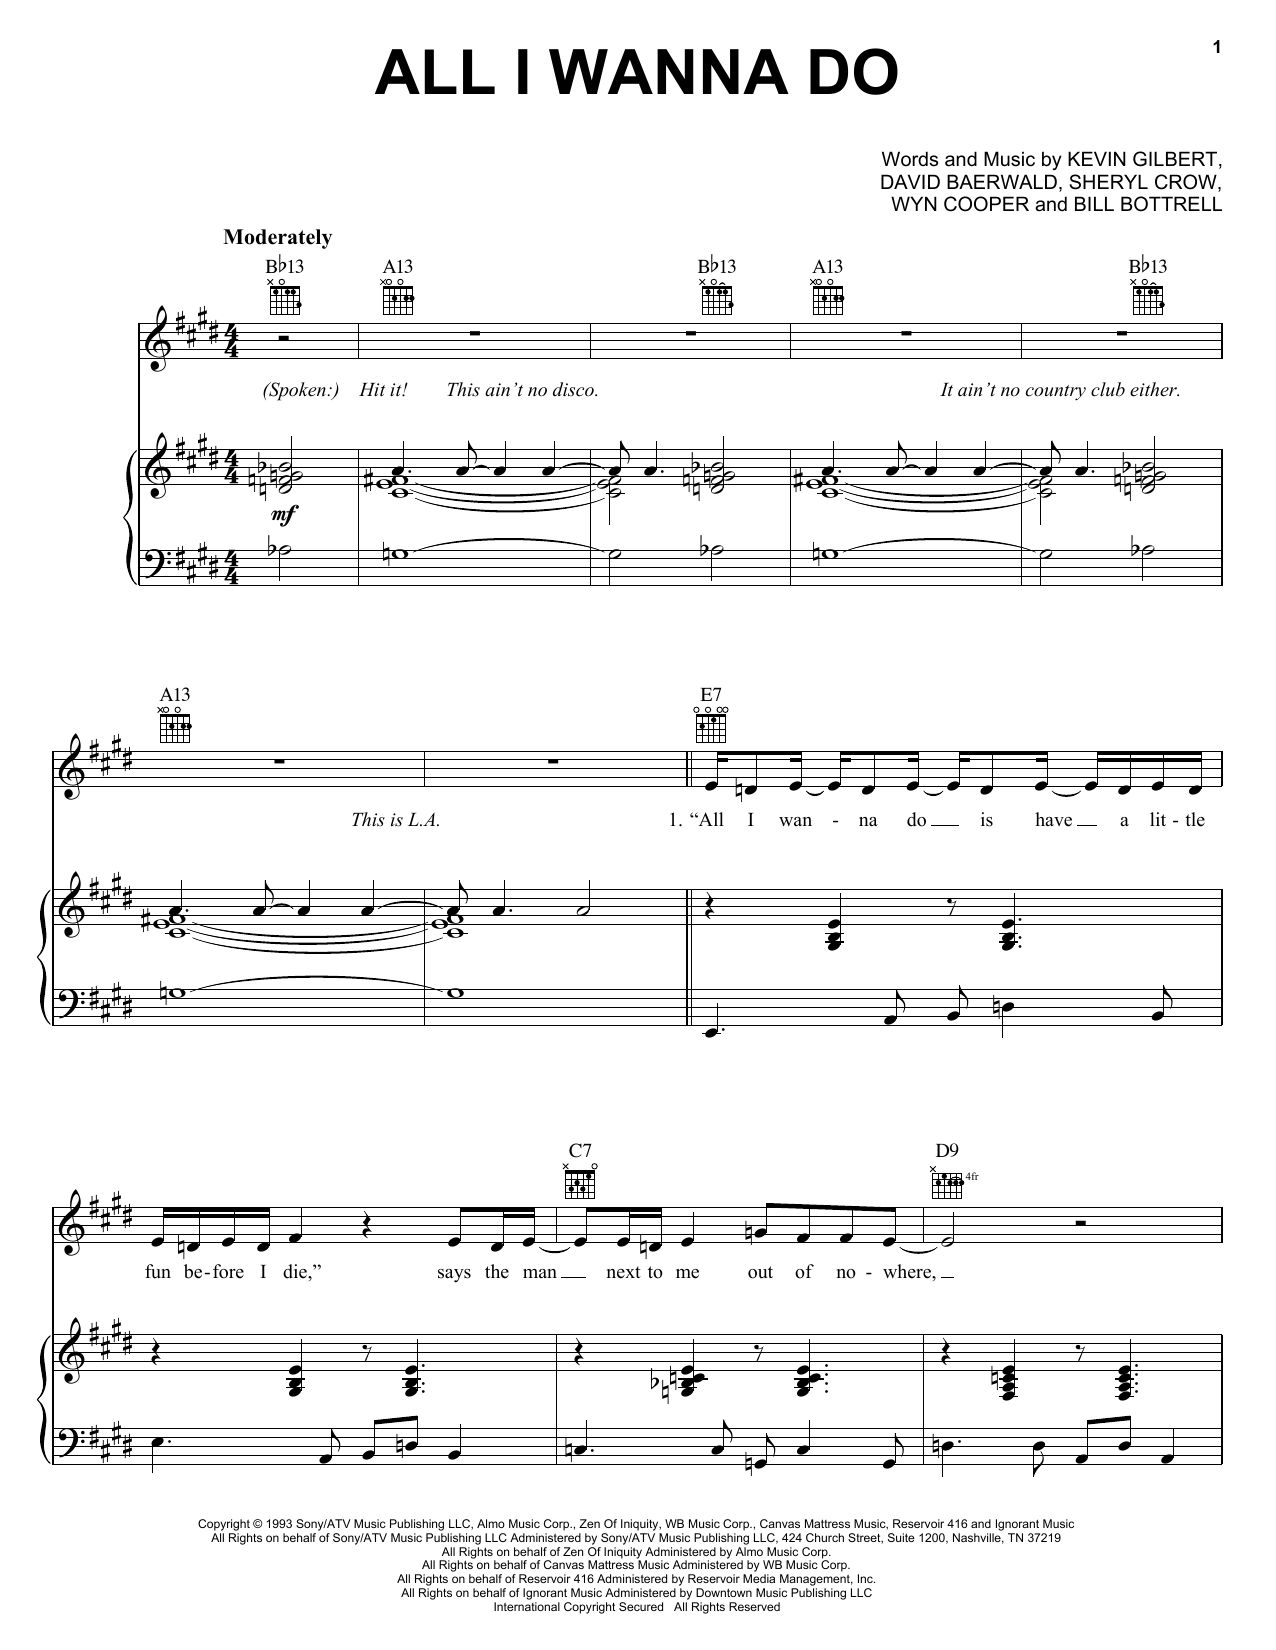 Sheryl Crow All I Wanna Do sheet music notes and chords. Download Printable PDF.